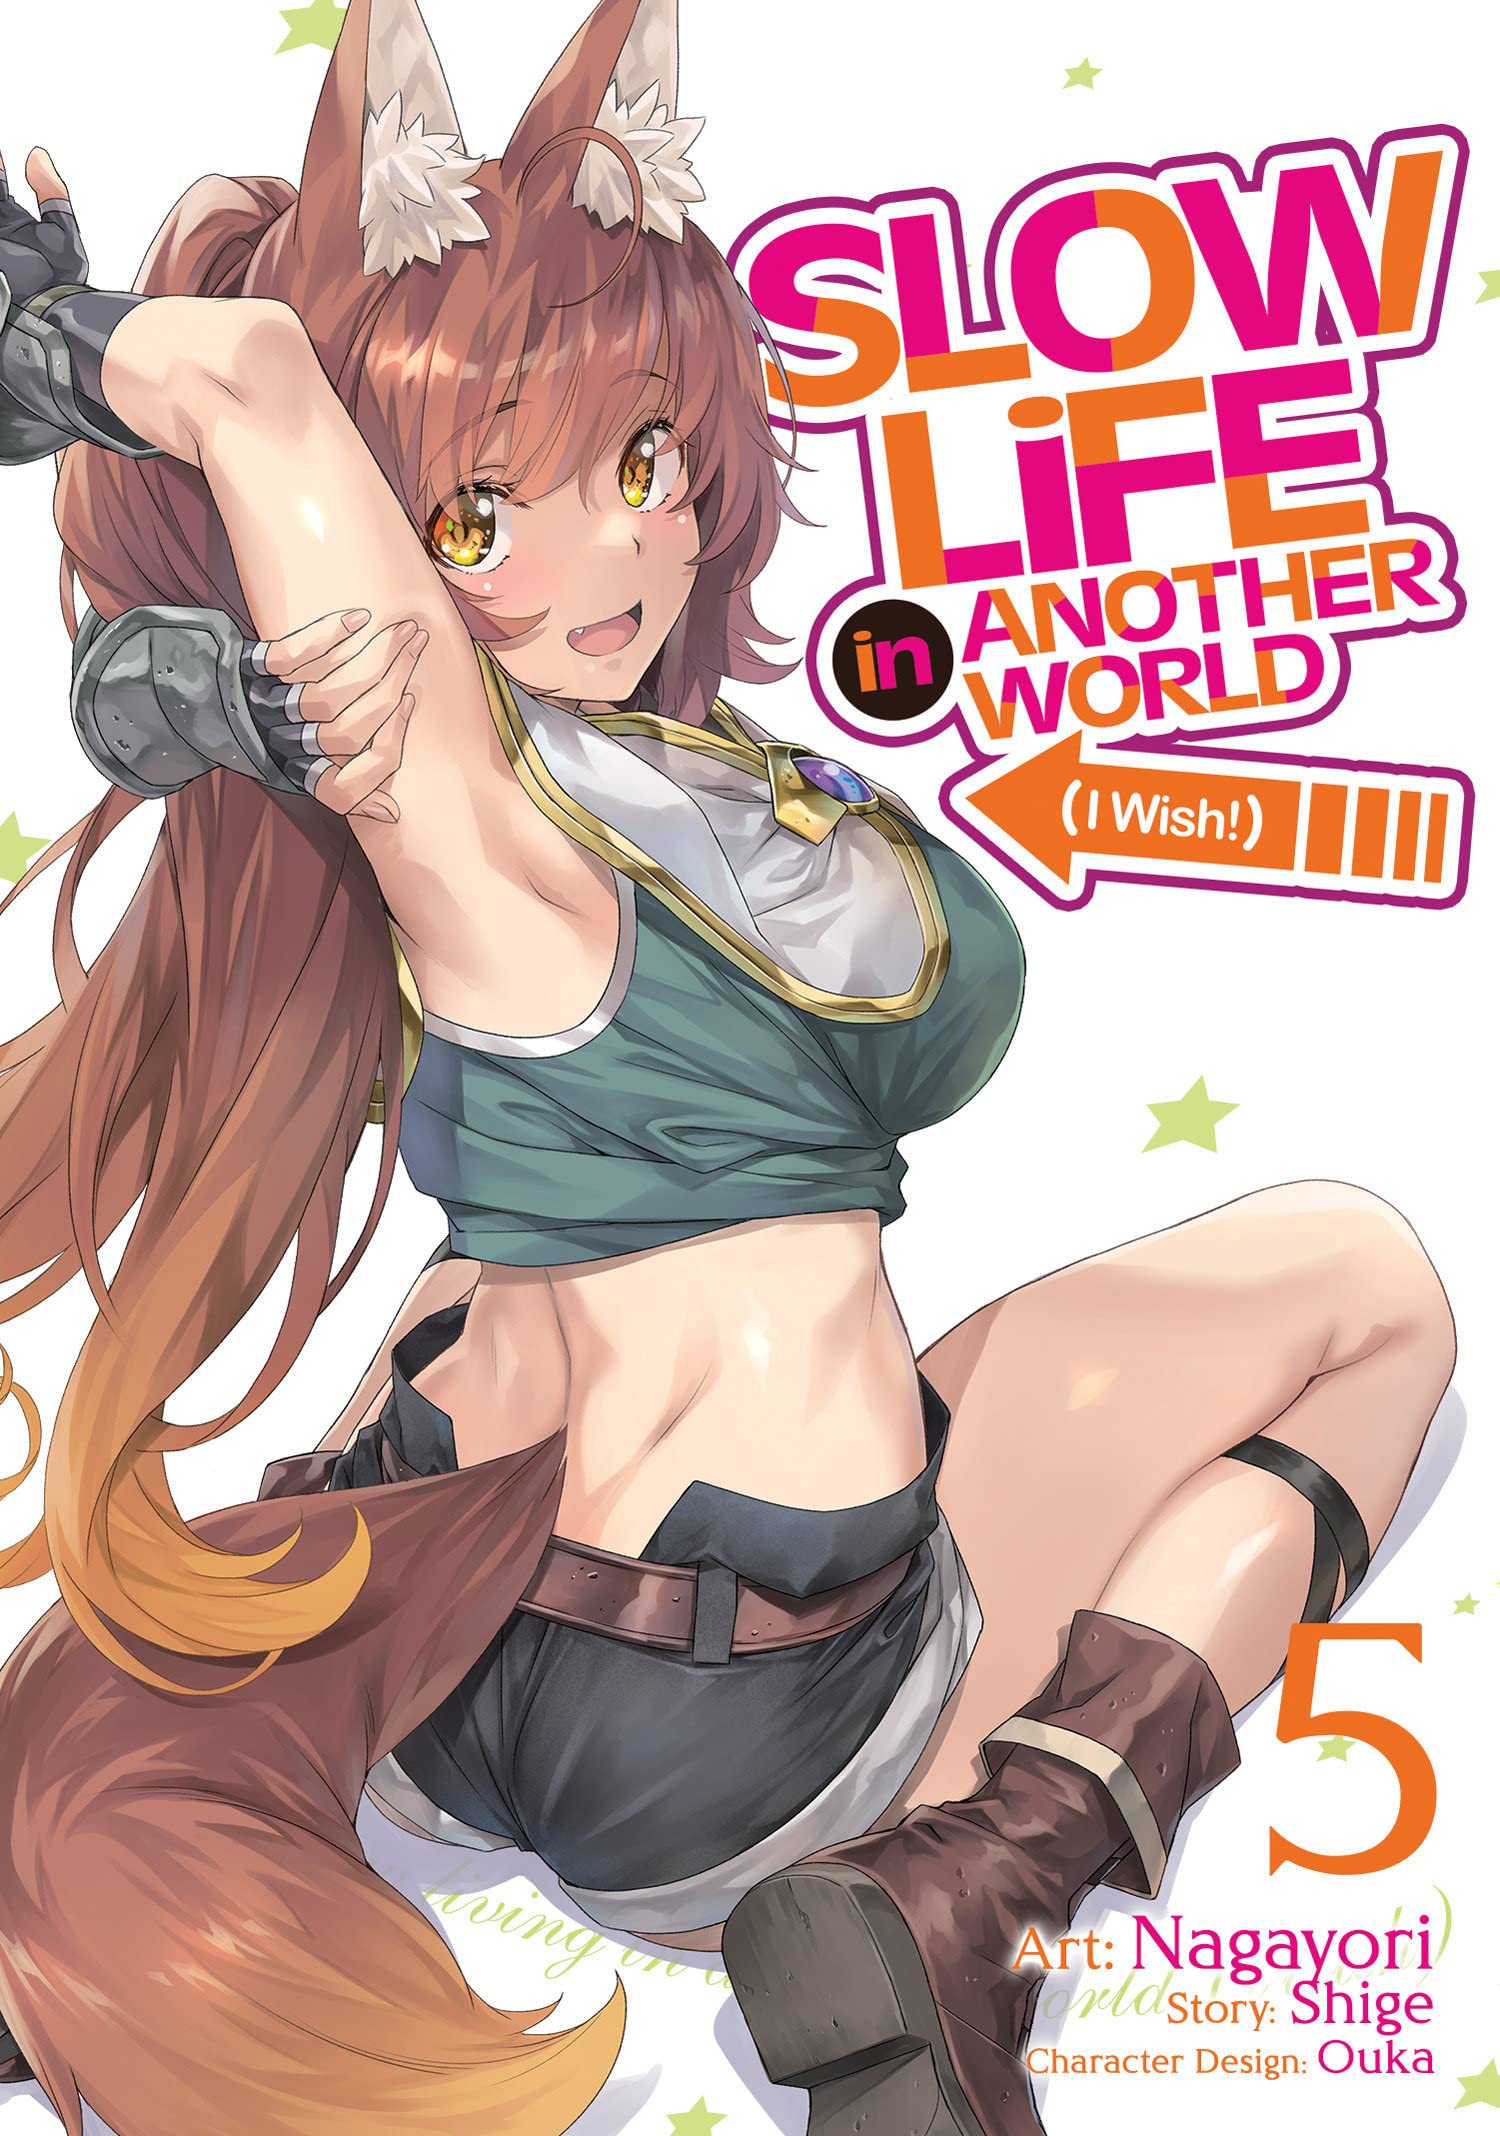 Slow Life In Another World (I Wish!) Vol. 05